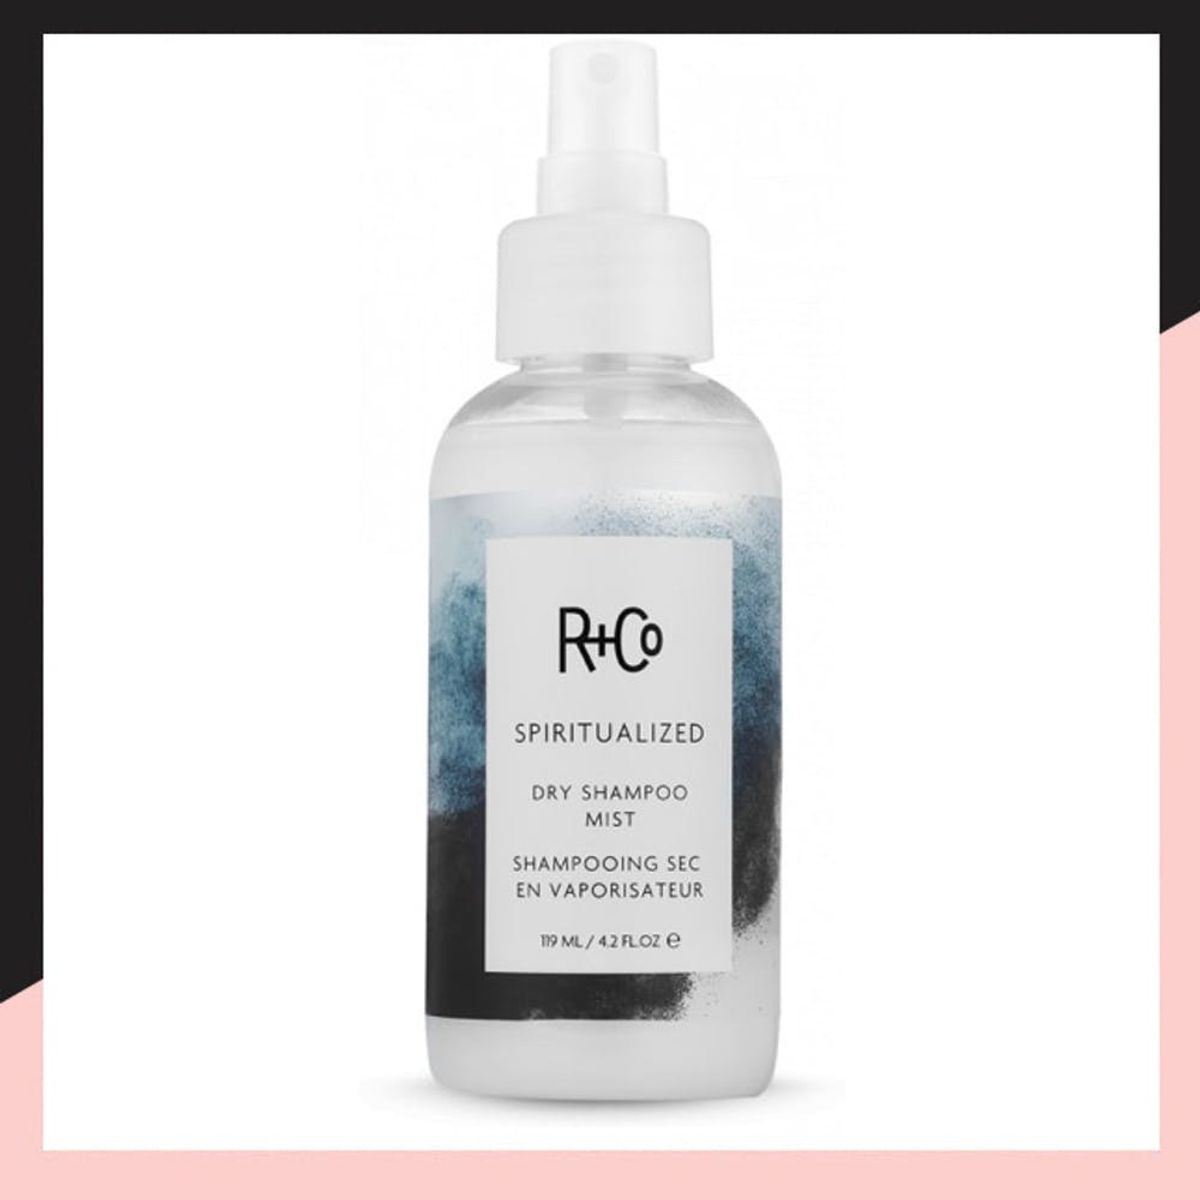 Micellar Water Is Now a Go-to Ingredient in … Hair Products?